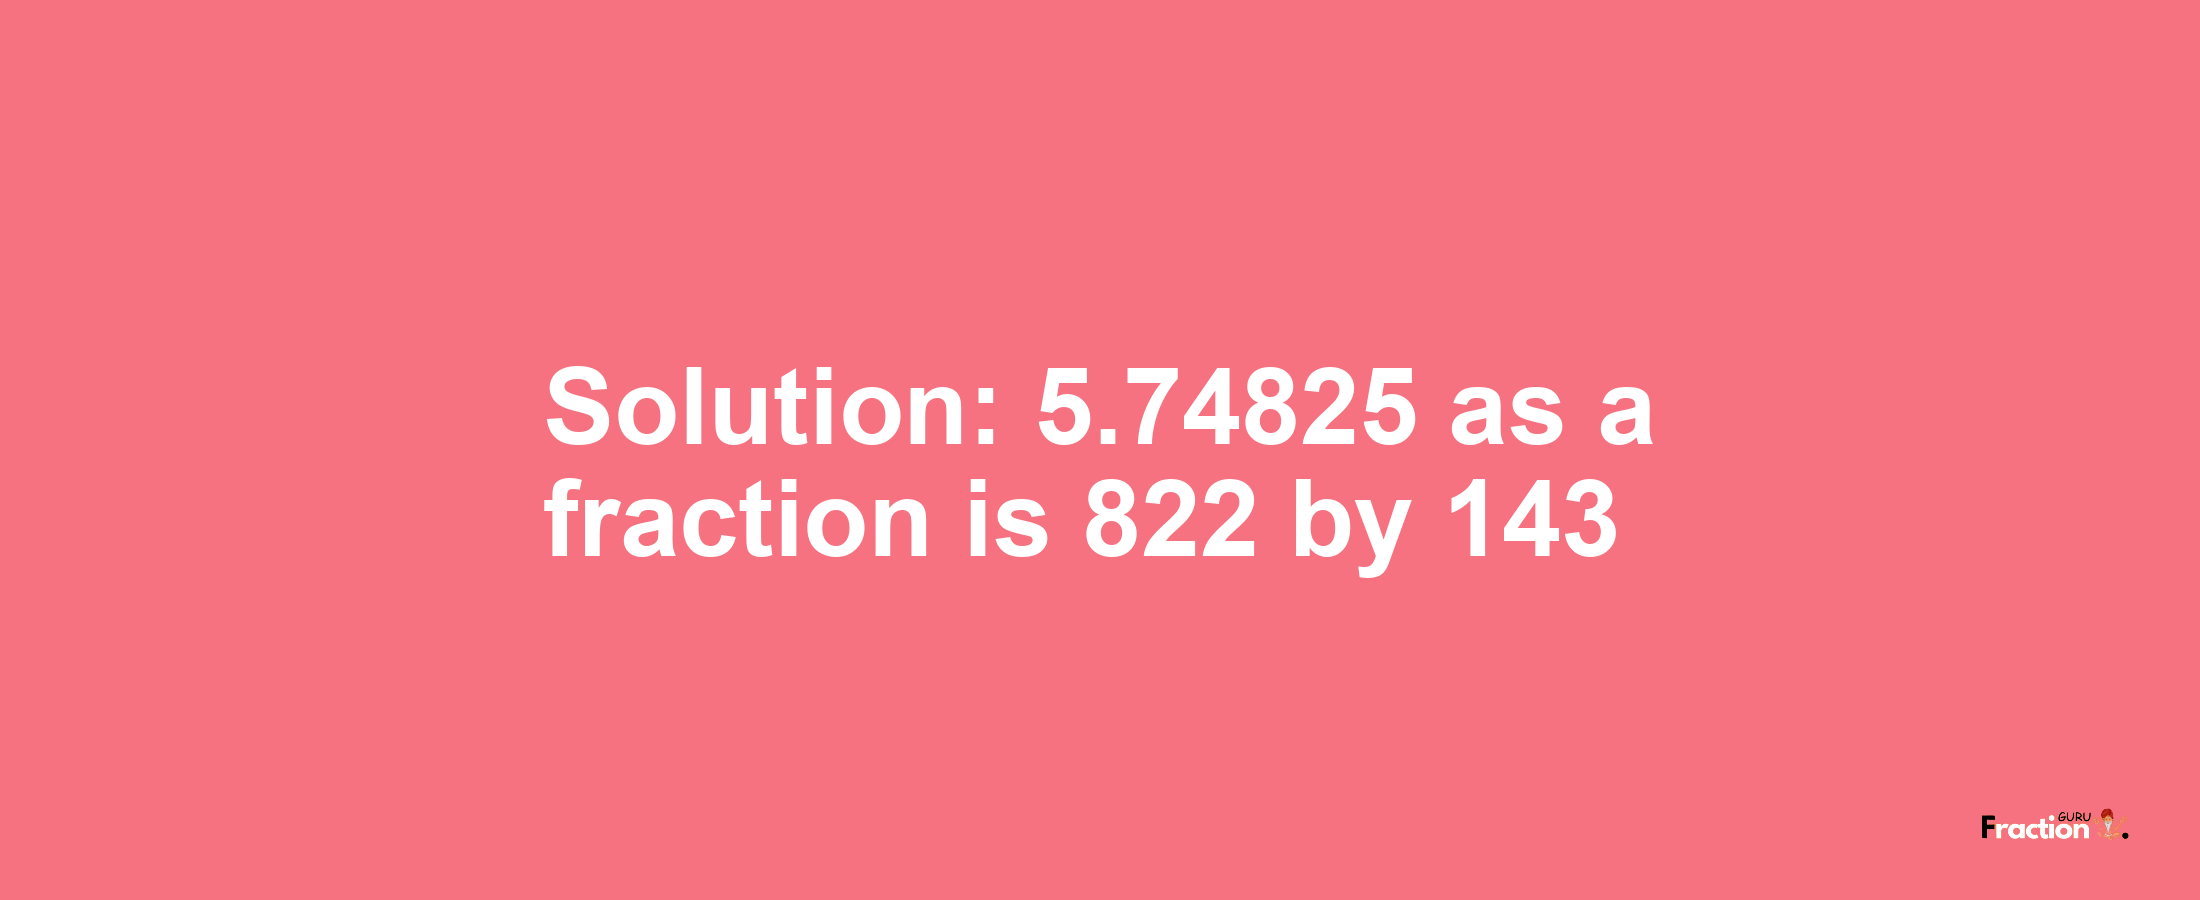 Solution:5.74825 as a fraction is 822/143